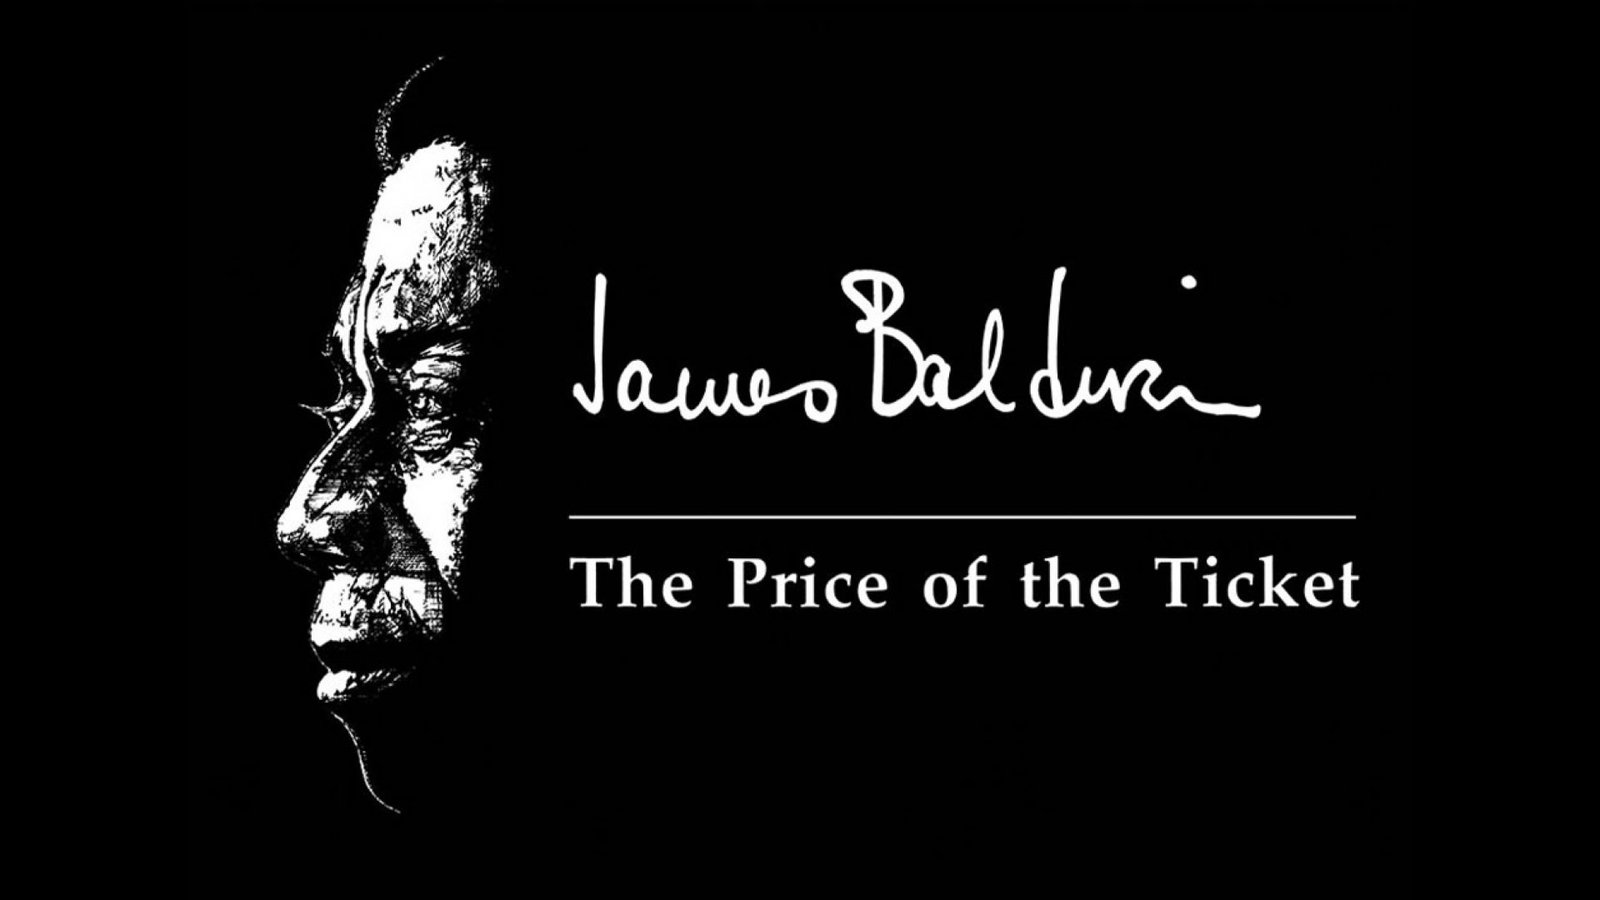 James Baldwin: The Price of the Ticket - The Legendary Author and Civil Rights Activist